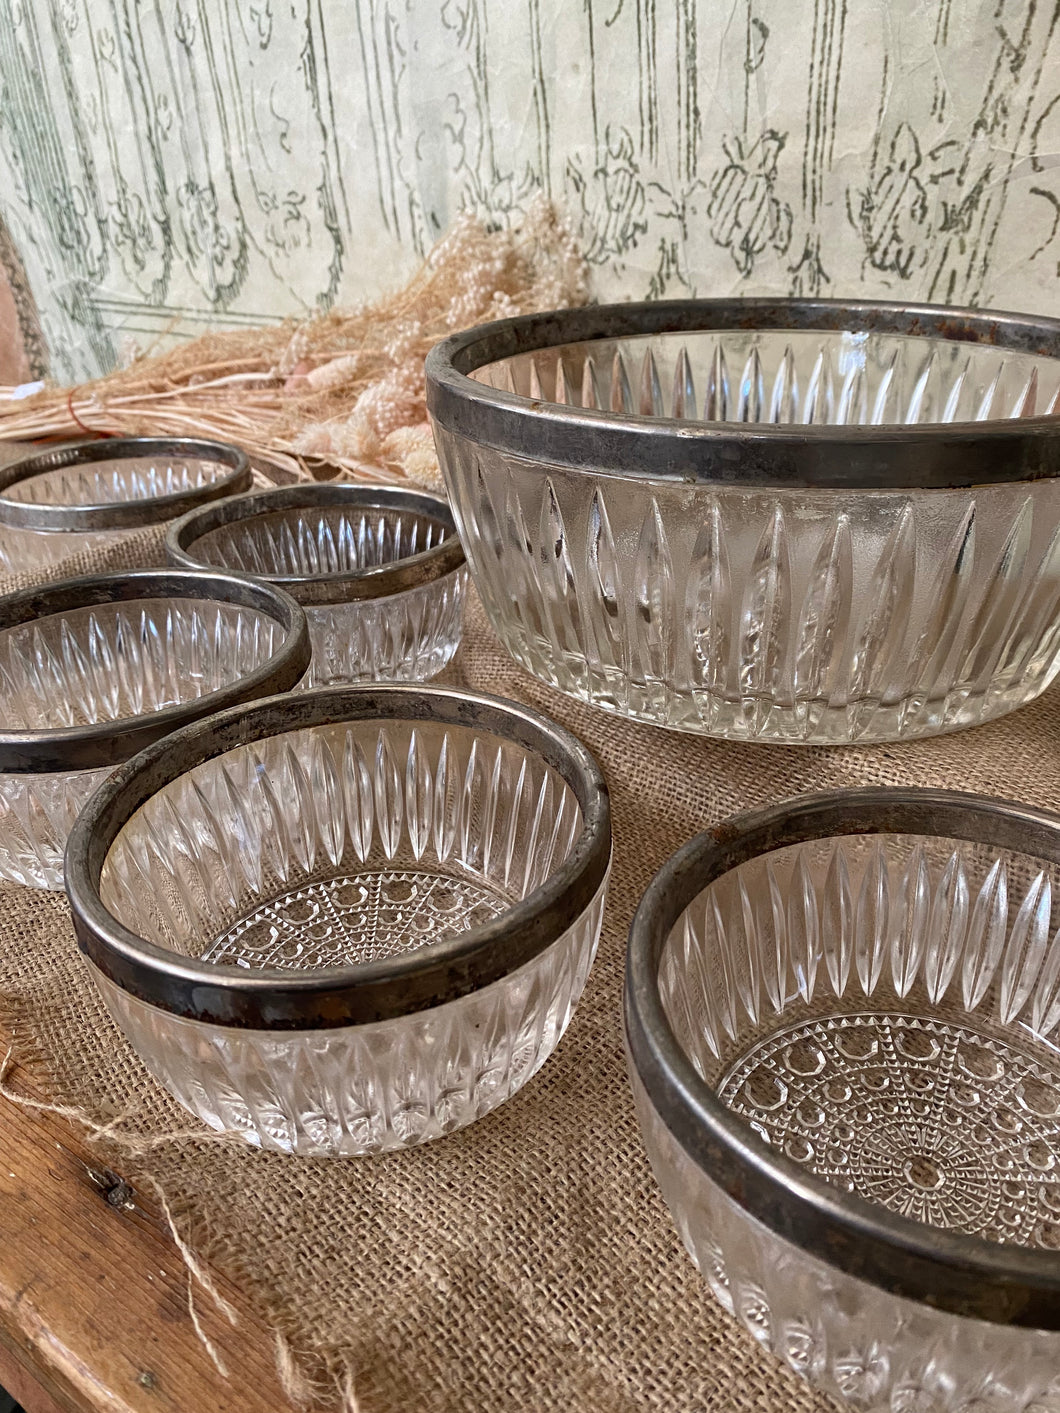 Vintage Set of Glass Serving Bowls with Silver Rims.